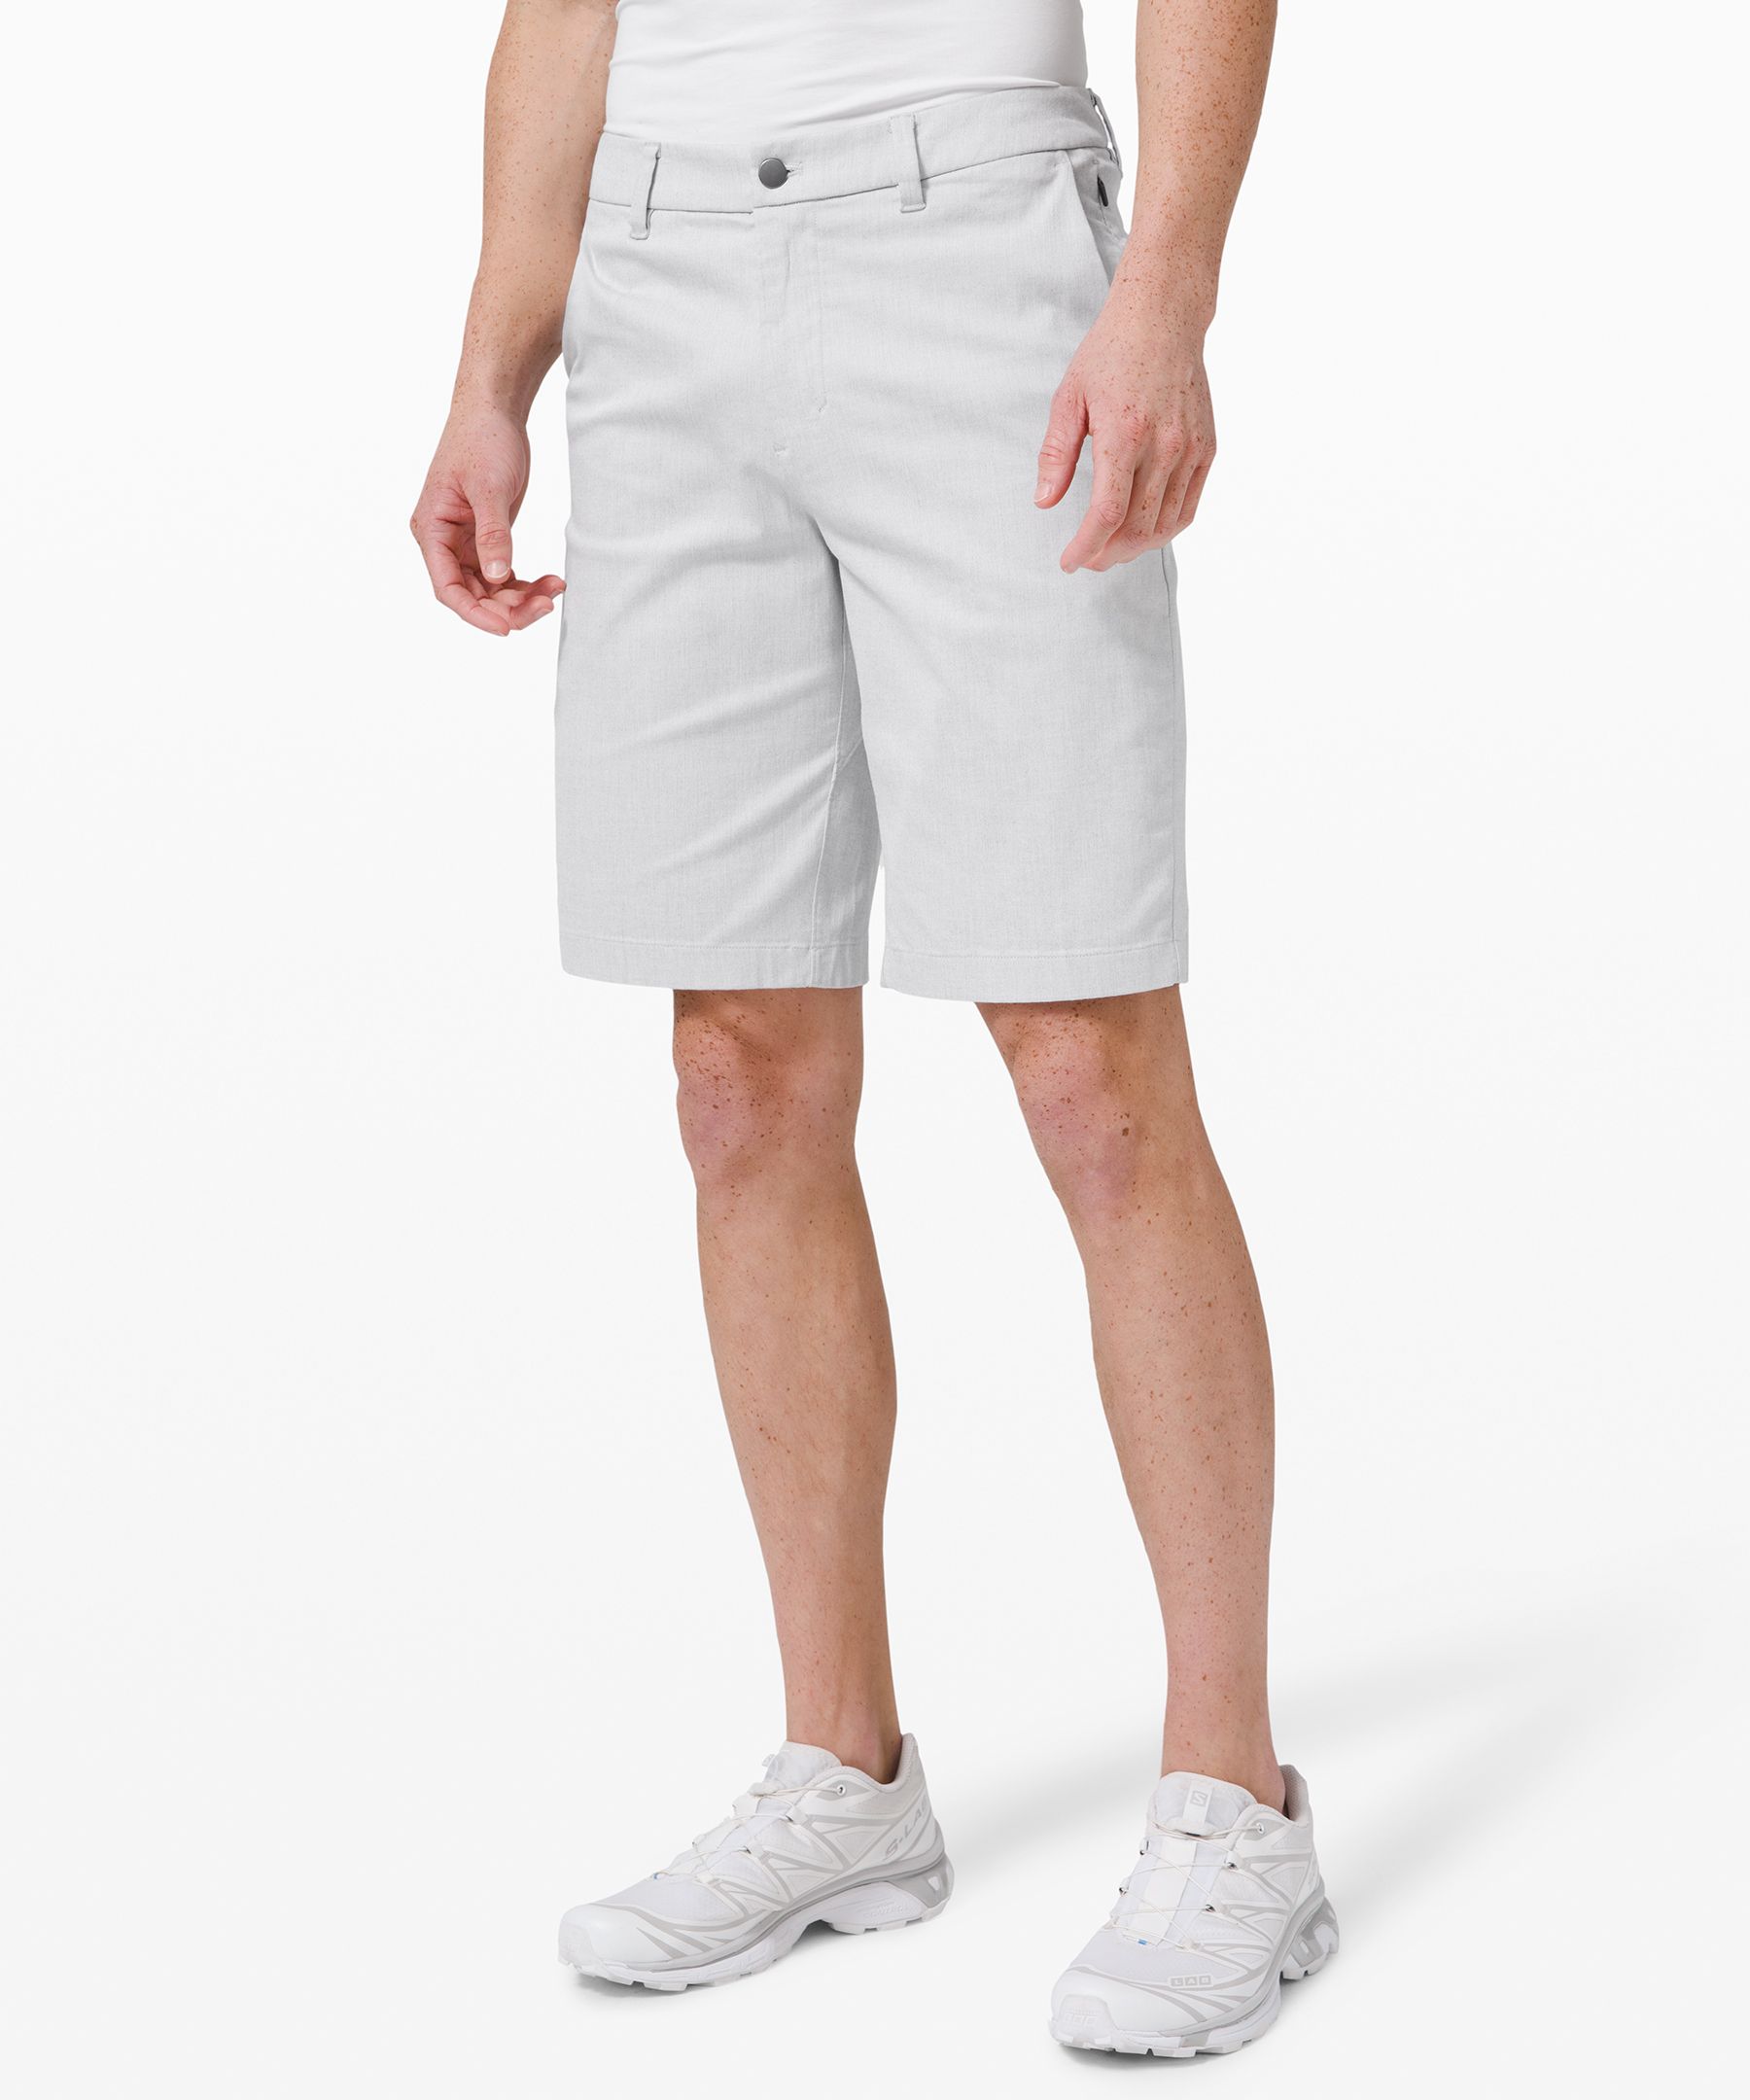 Lululemon Commission Relaxed Fit Shorts 11" Qwick Oxford In White/black